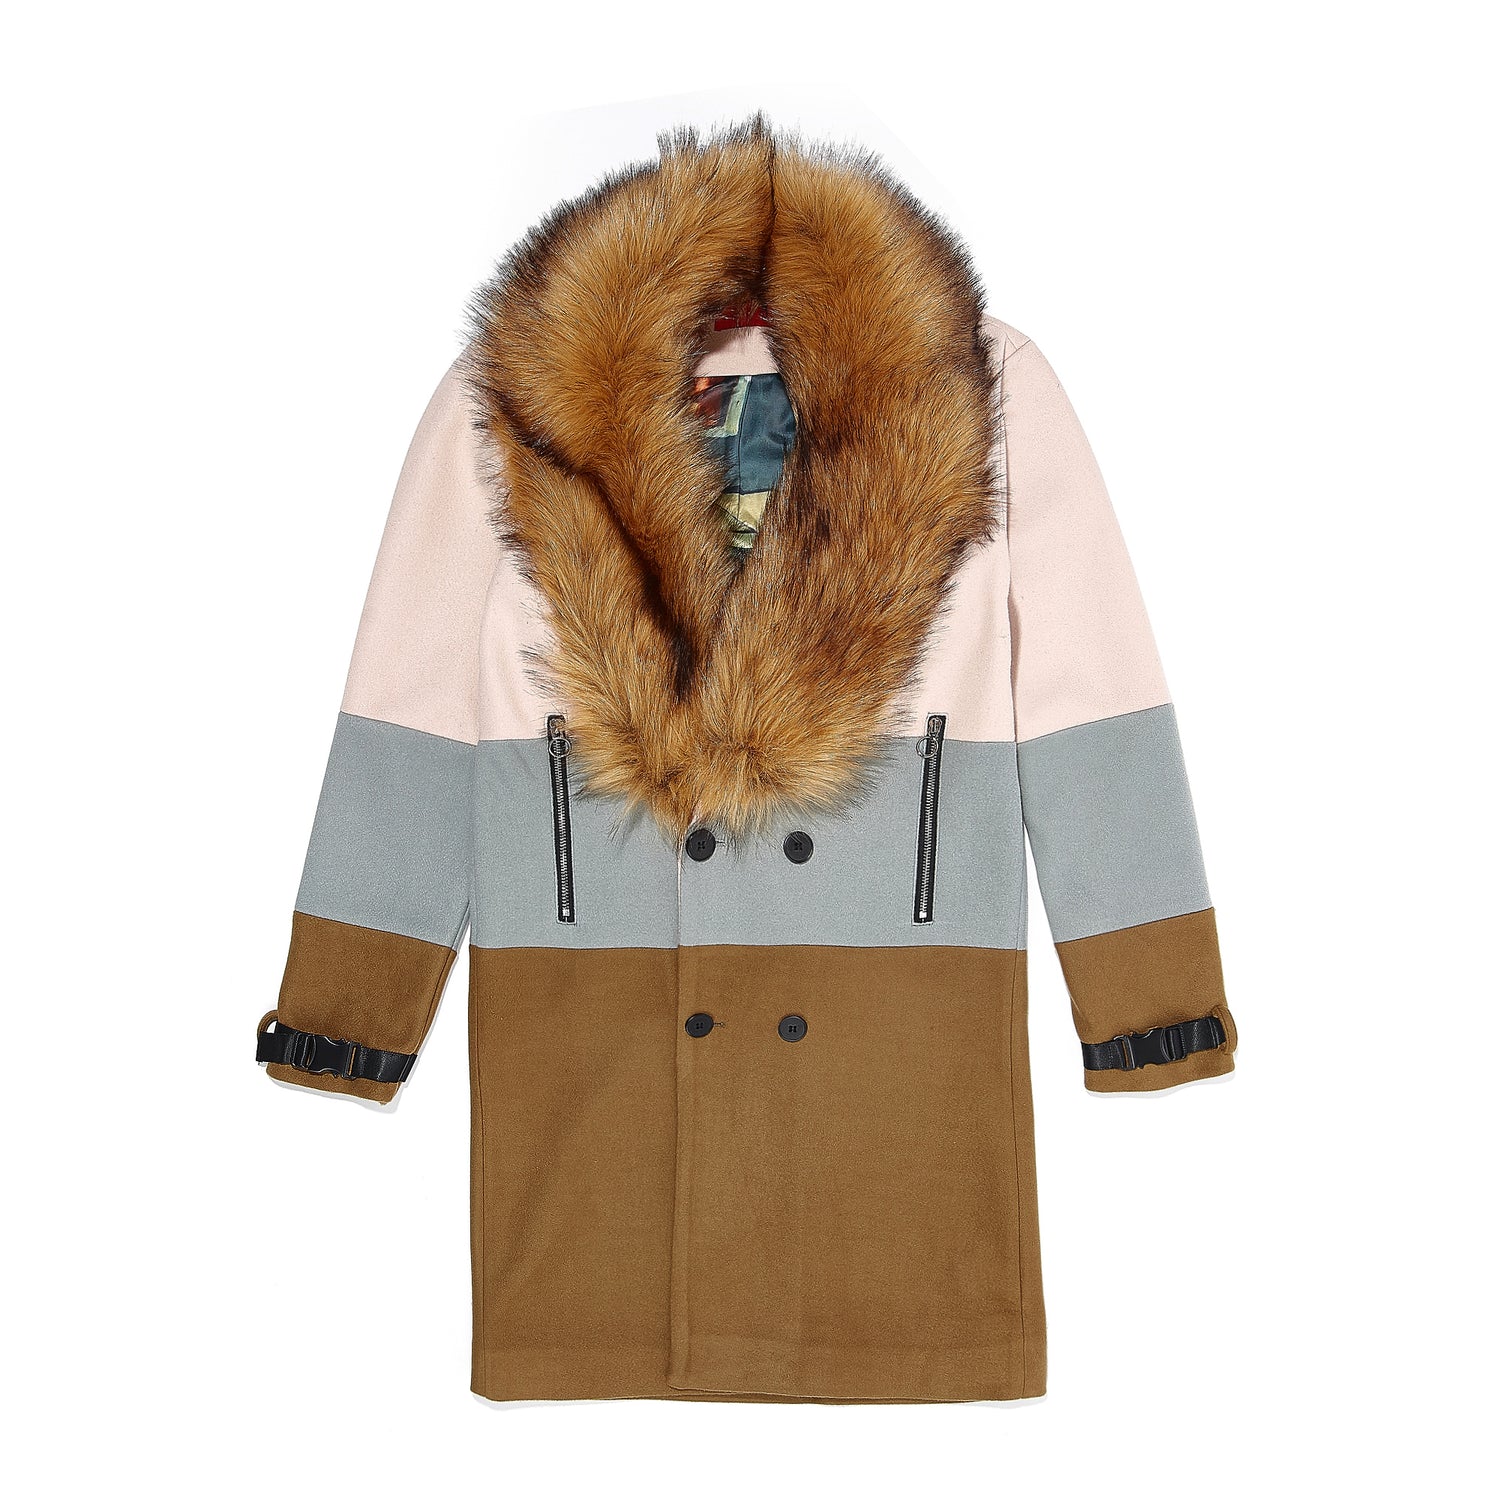 Removable fur 3 tone overcoat